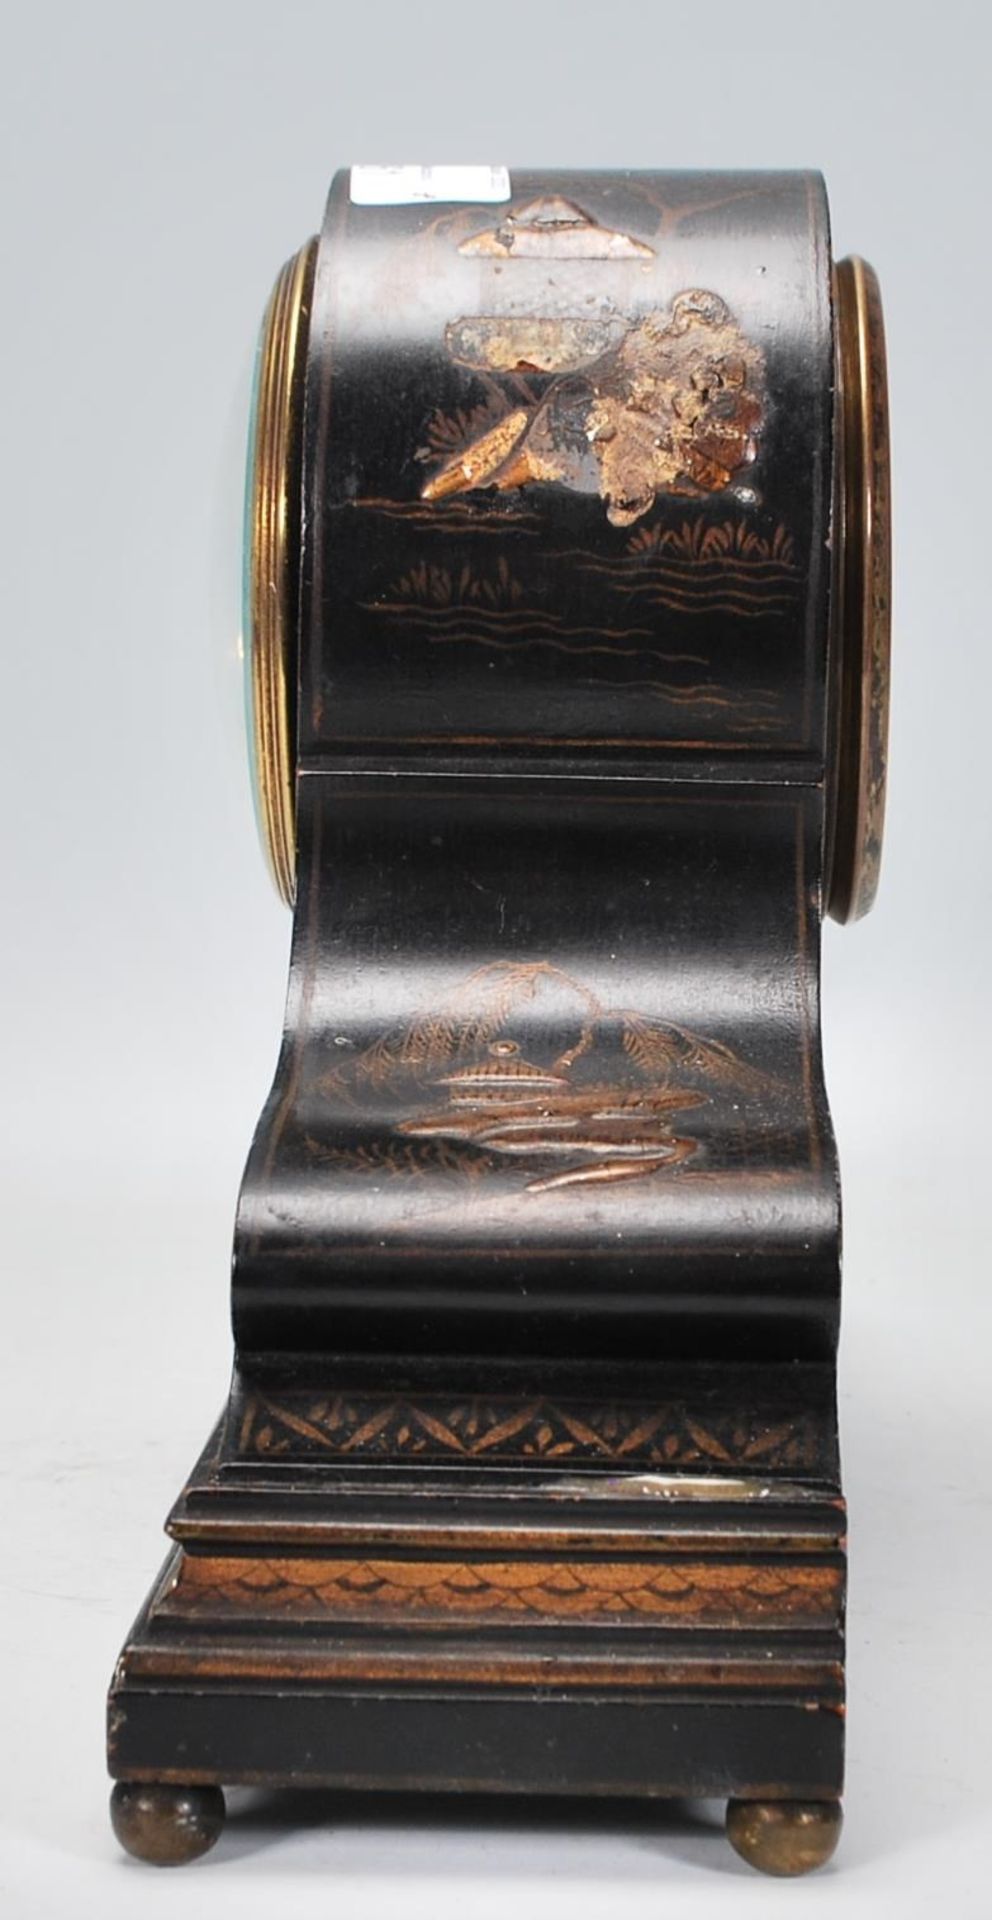 An early 20th century Japanned black lacquer and chinoiserie decorated dome top mantel clock in - Image 6 of 7